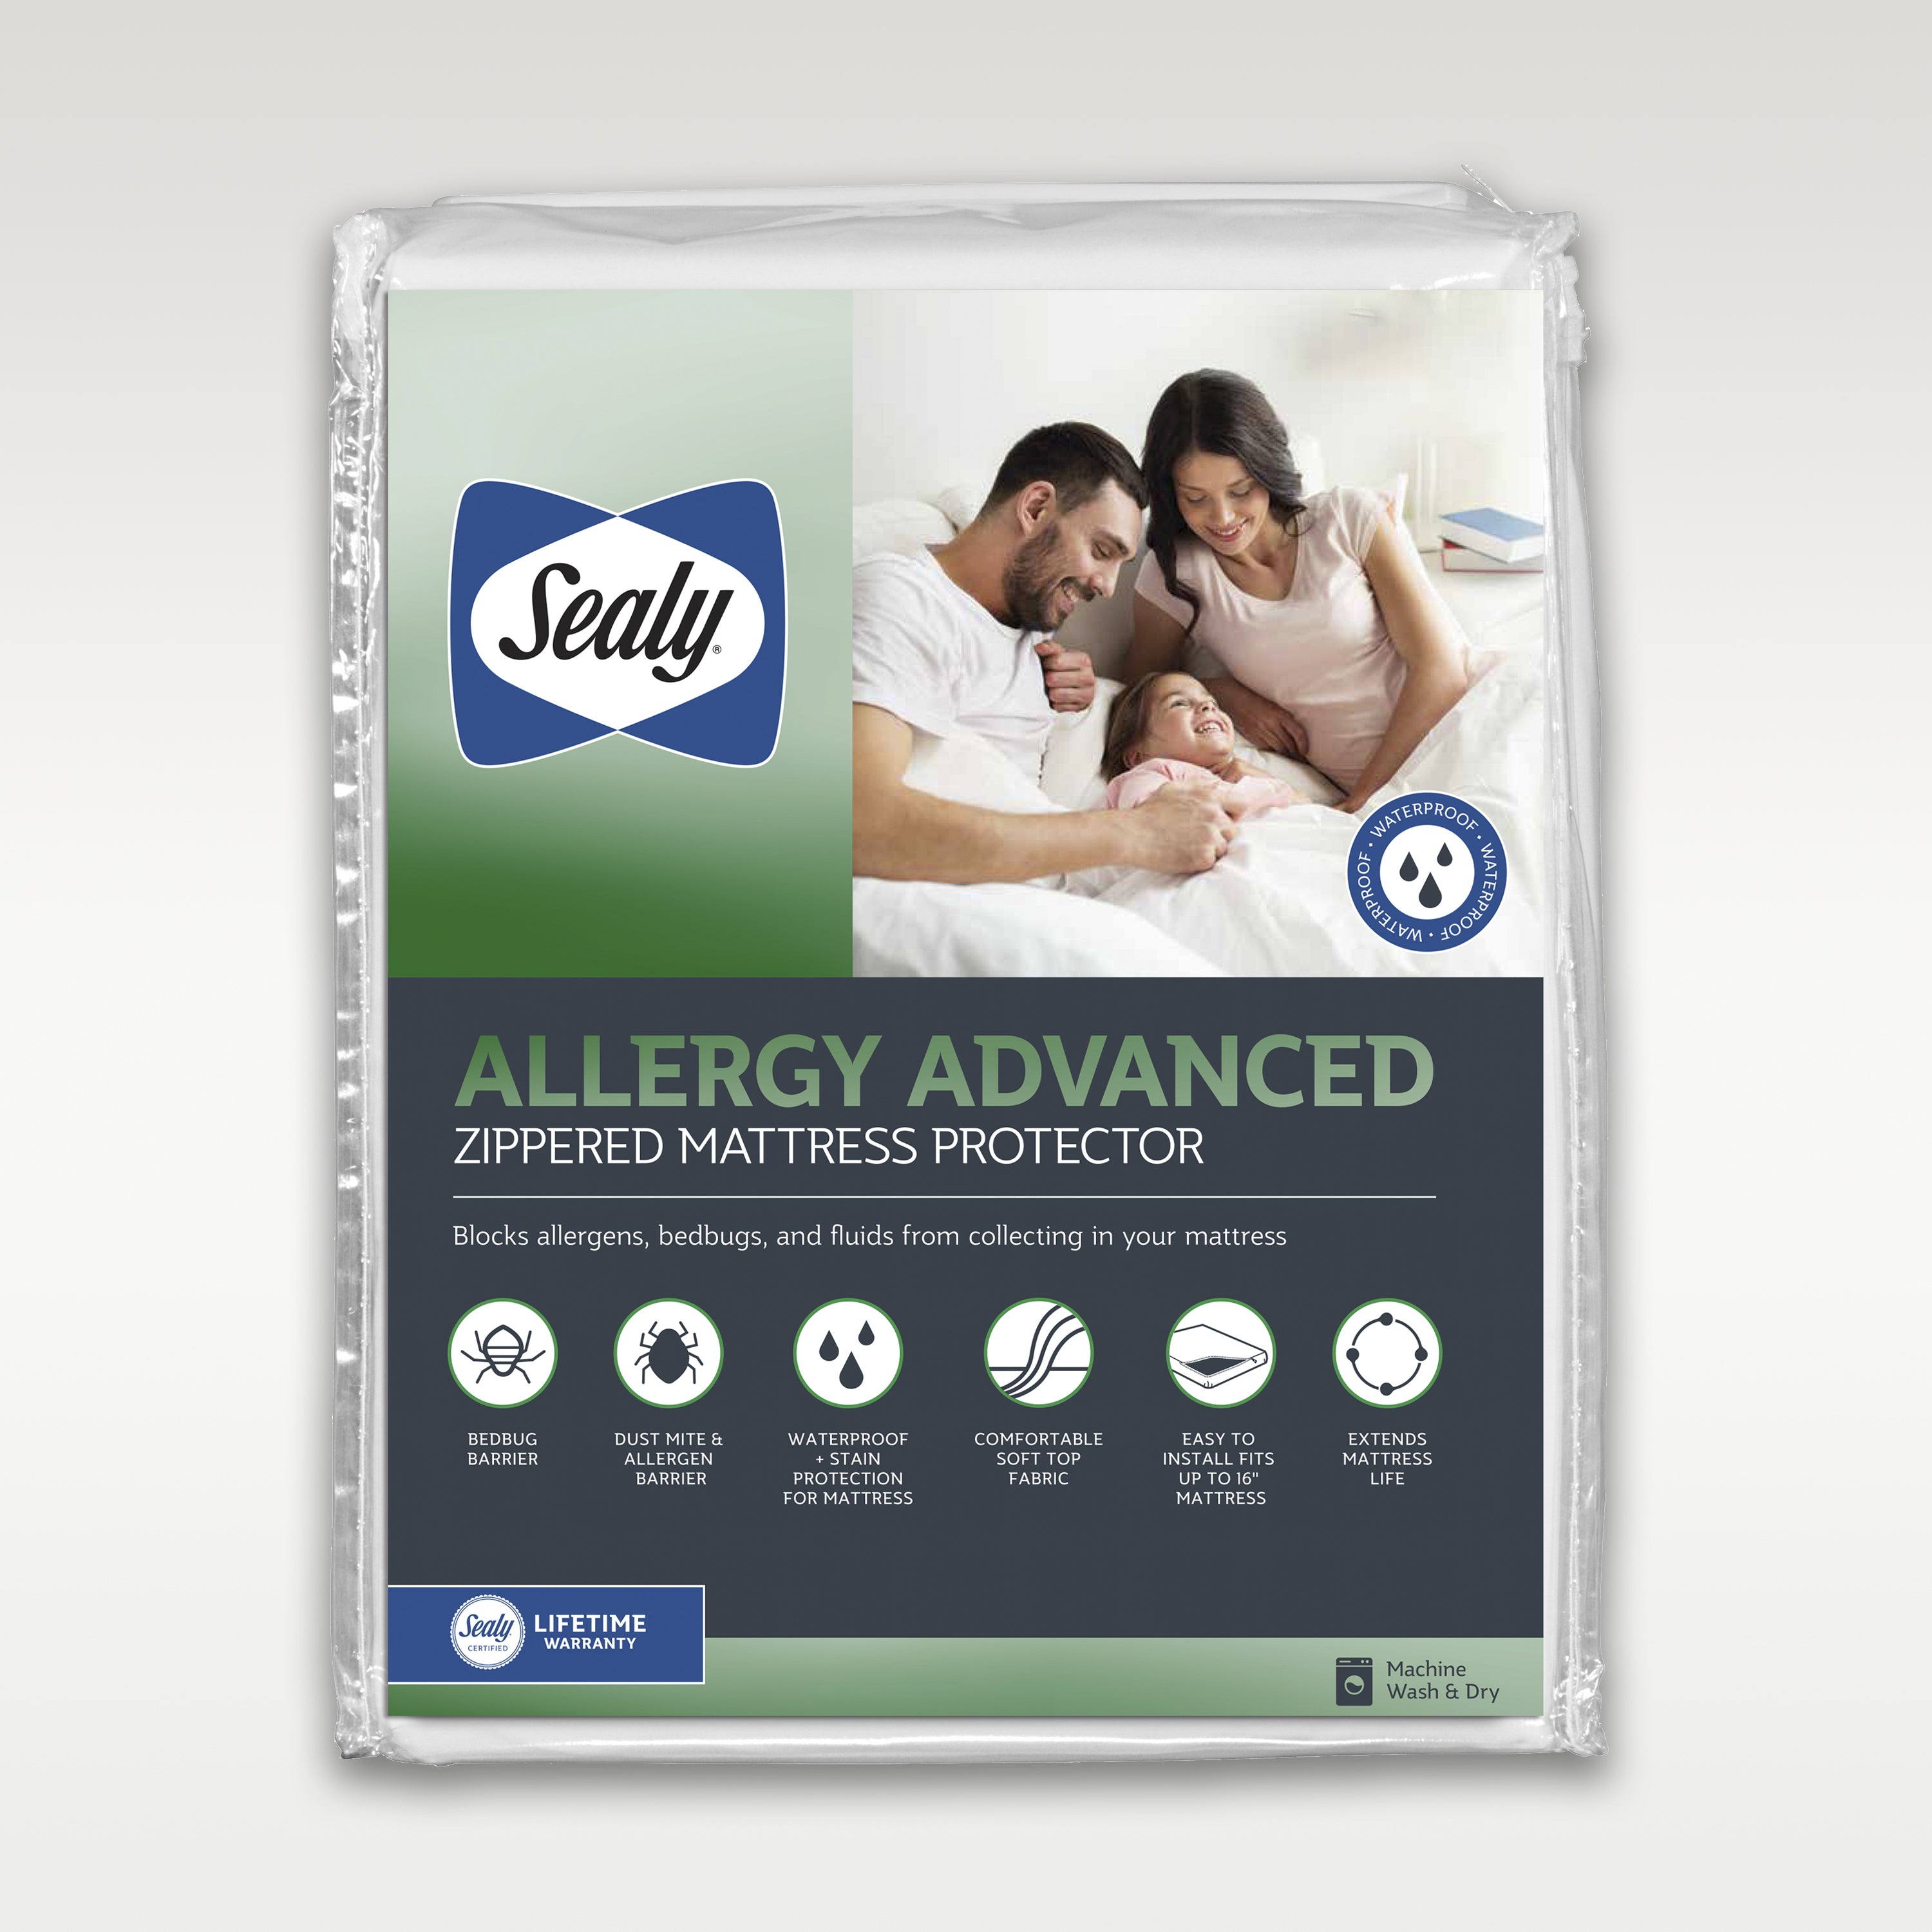 Tranquil Dust Mite Proof & Allergy Mattress Covers, Allergy Guard Direct